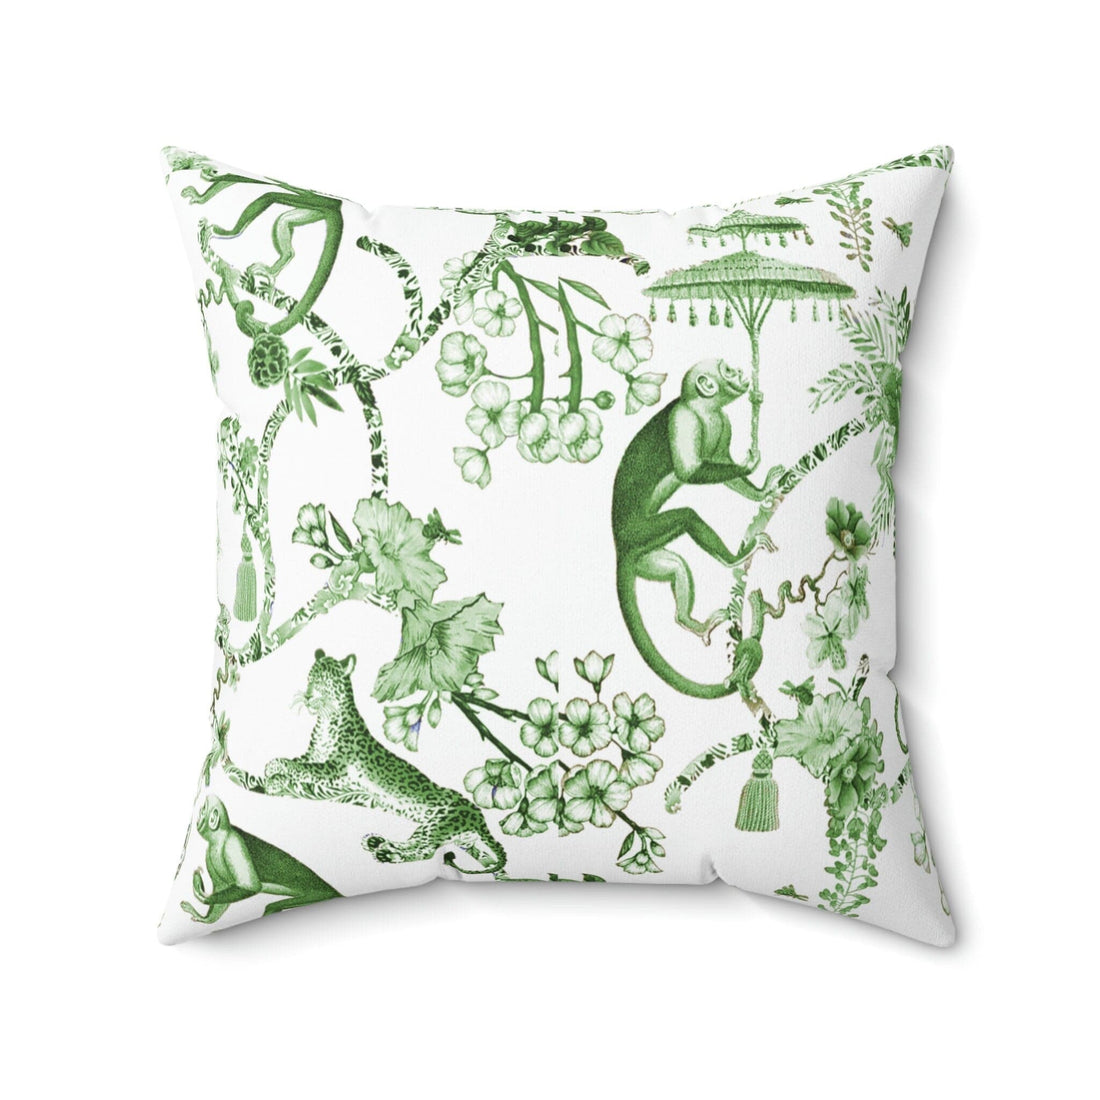 Kate McEnroe New York Chinoiserie Throw Pillow, Floral Green, White Chinoiserie Jungle, Farmhouse Country Cottage Accent Pillow, Botanical Toile Home DecorThrow Pillows31913688491365140095